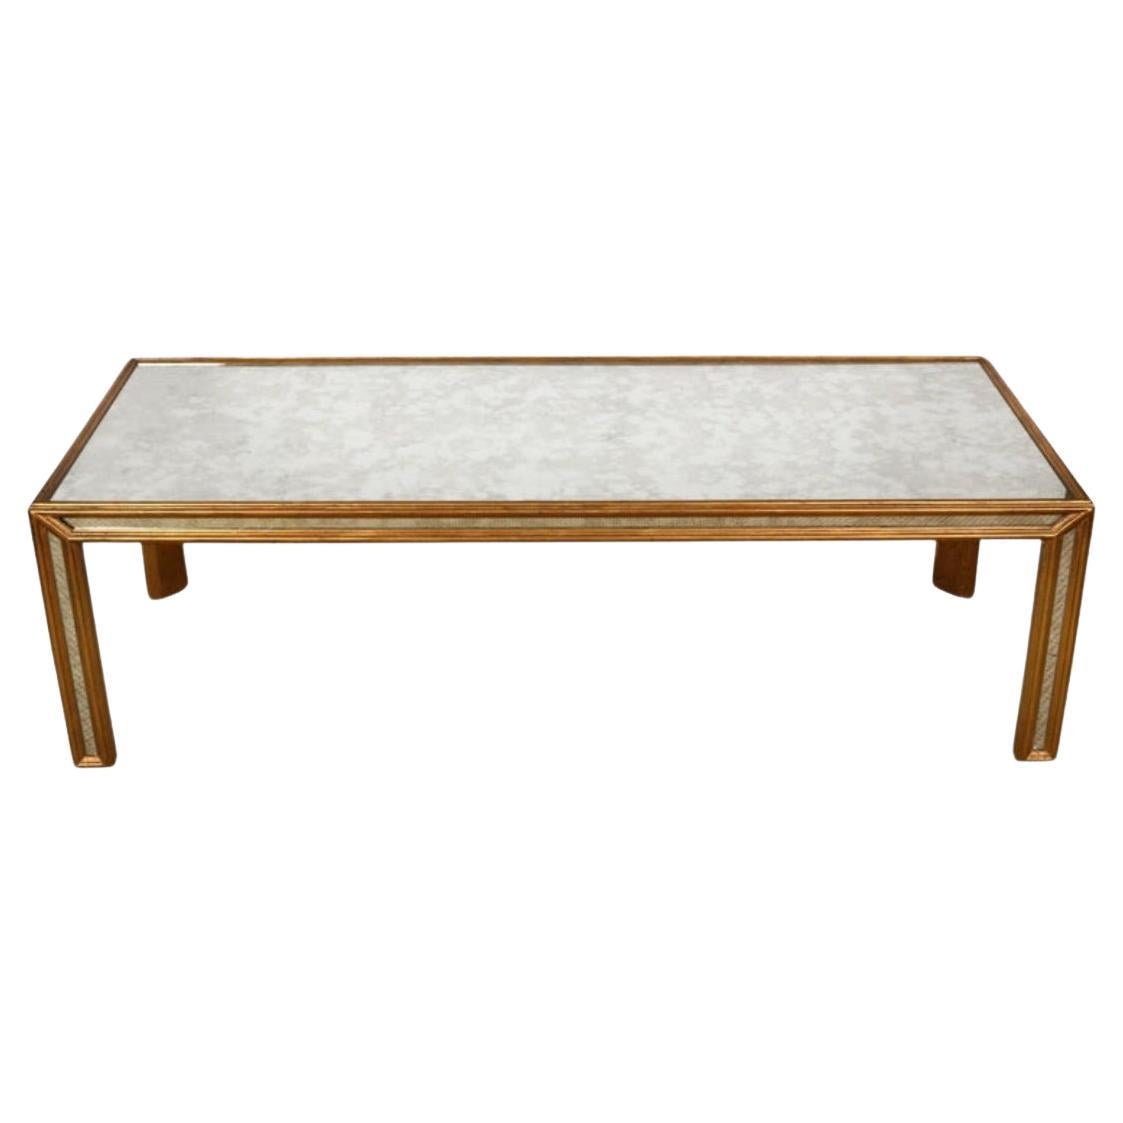 Elegant Gilt and Mirrored Glass Coffee Table by Bernhardt For Sale